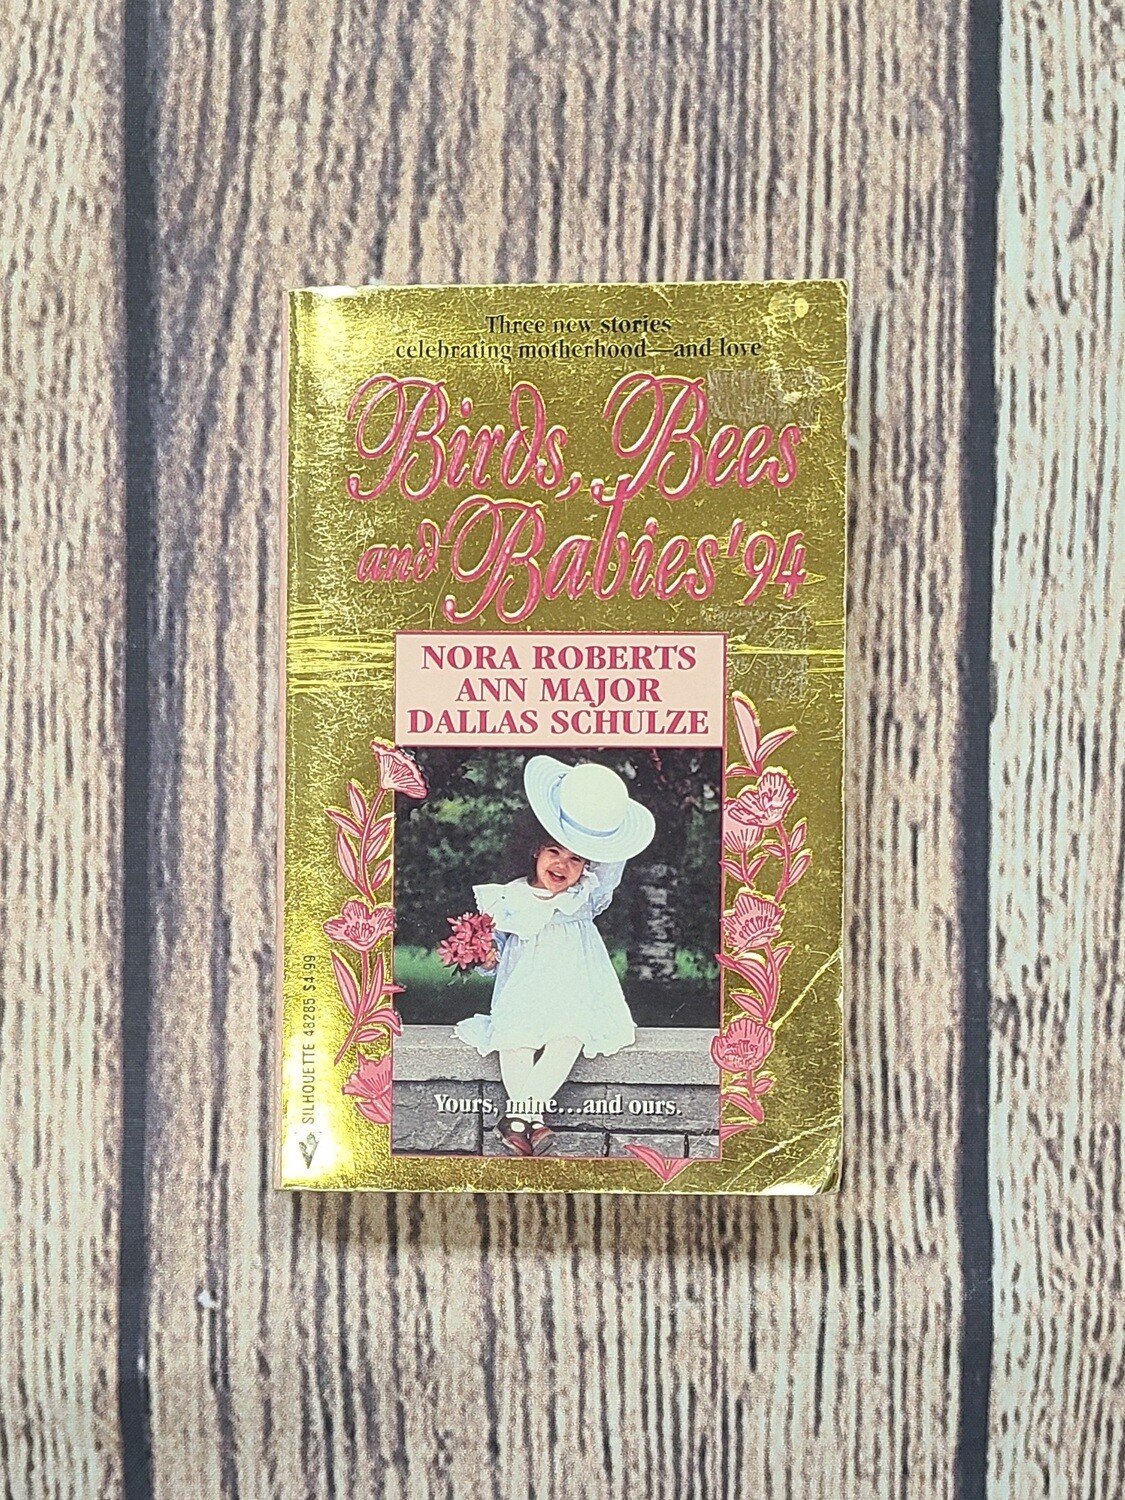 Birds, Bees, and Babies '94 by Nora Roberts, Ann Major, and Dallas Schulze